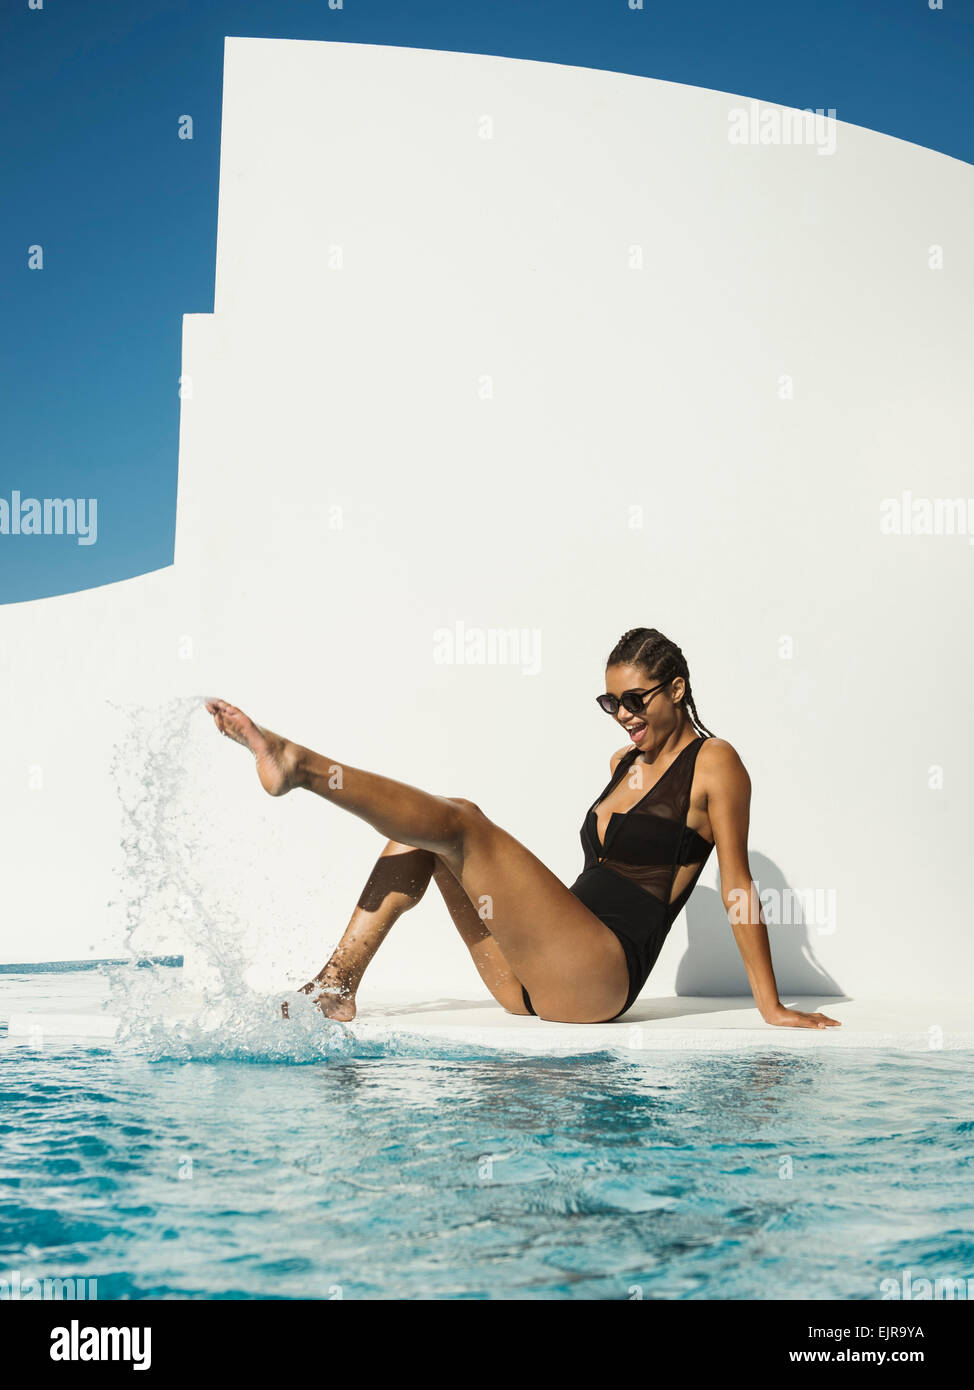 Mixed Race woman in swimsuit splashing in swimming pool Banque D'Images